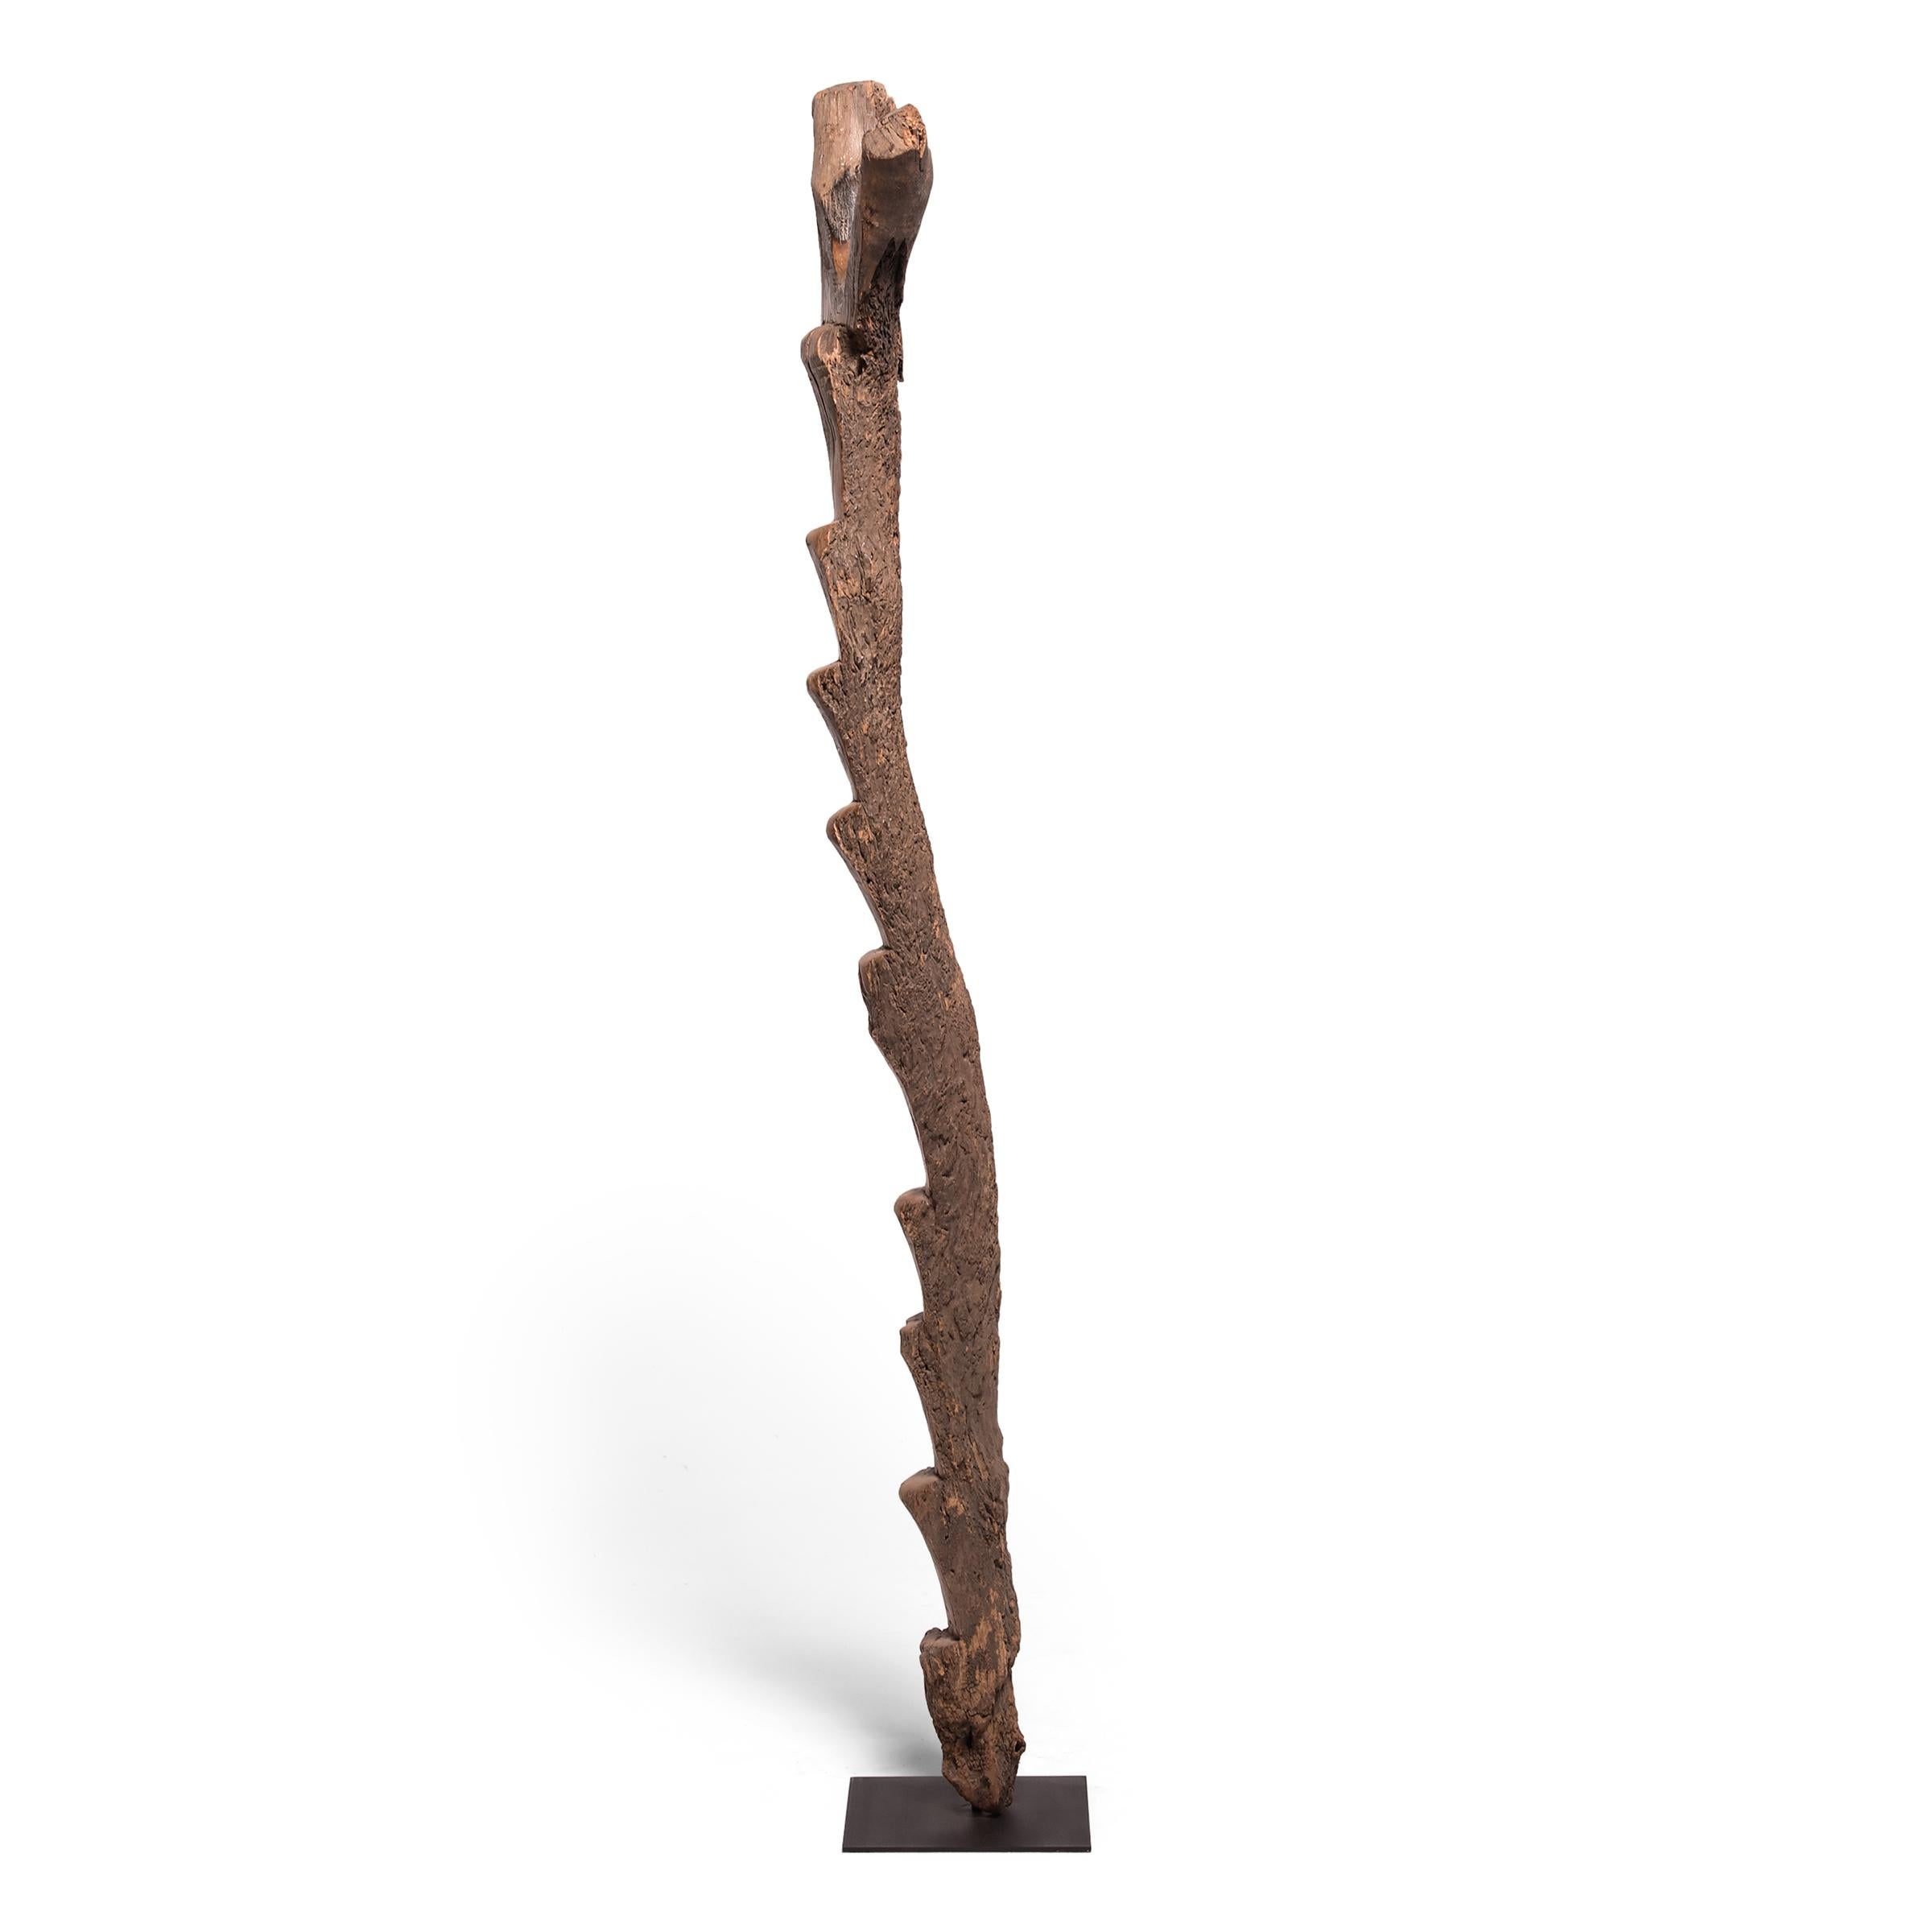 The Dogon people of Mali lived a vertical life. With homes set into cliff faces and orchards to harvest, tree ladders were integral tools of daily life. A pattern of well-worn steps darkens the wood, adding depth and texture, balanced by the